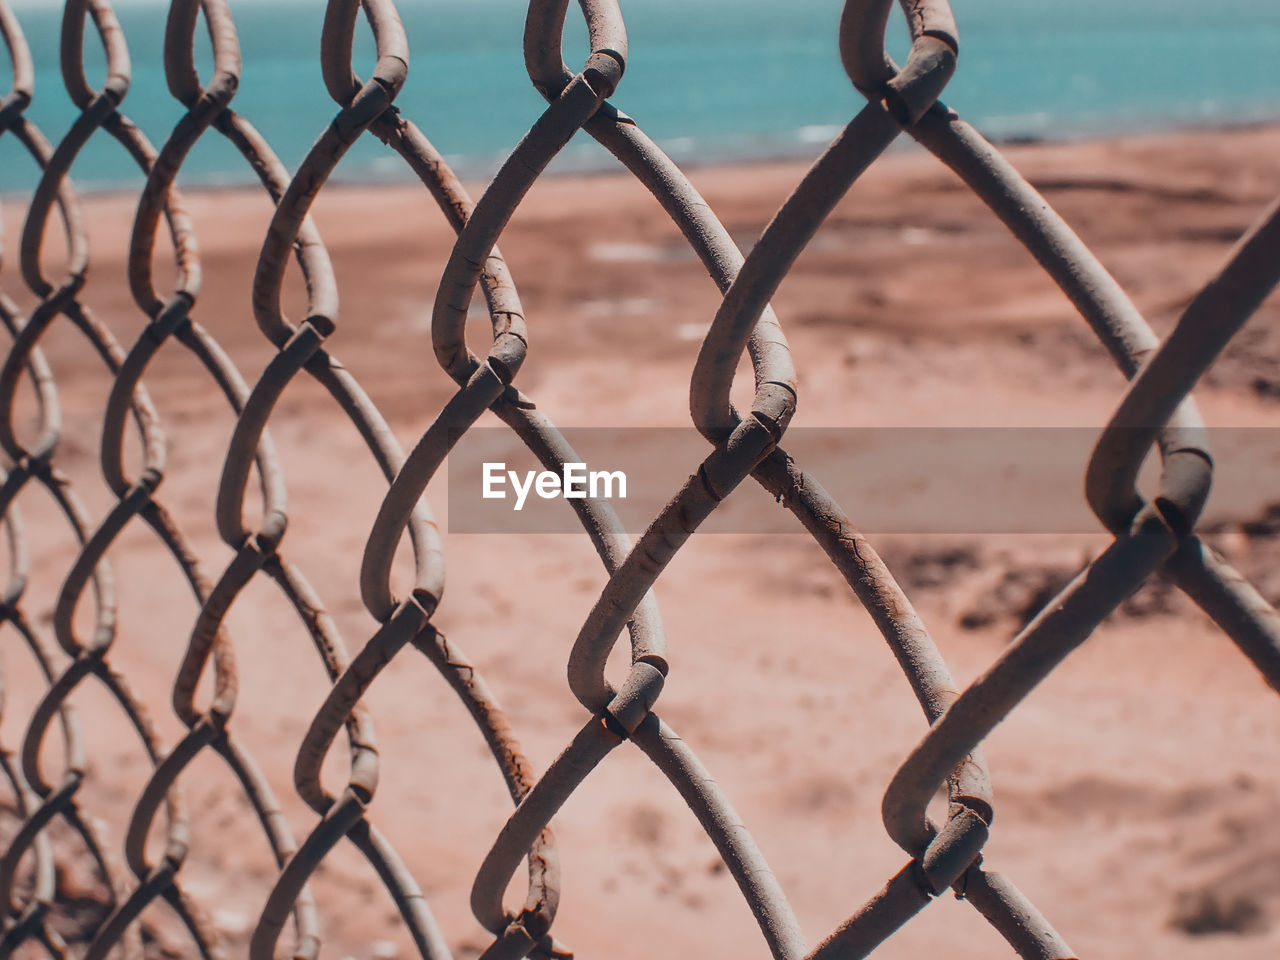 FULL FRAME SHOT OF CHAINLINK FENCE IN SEA